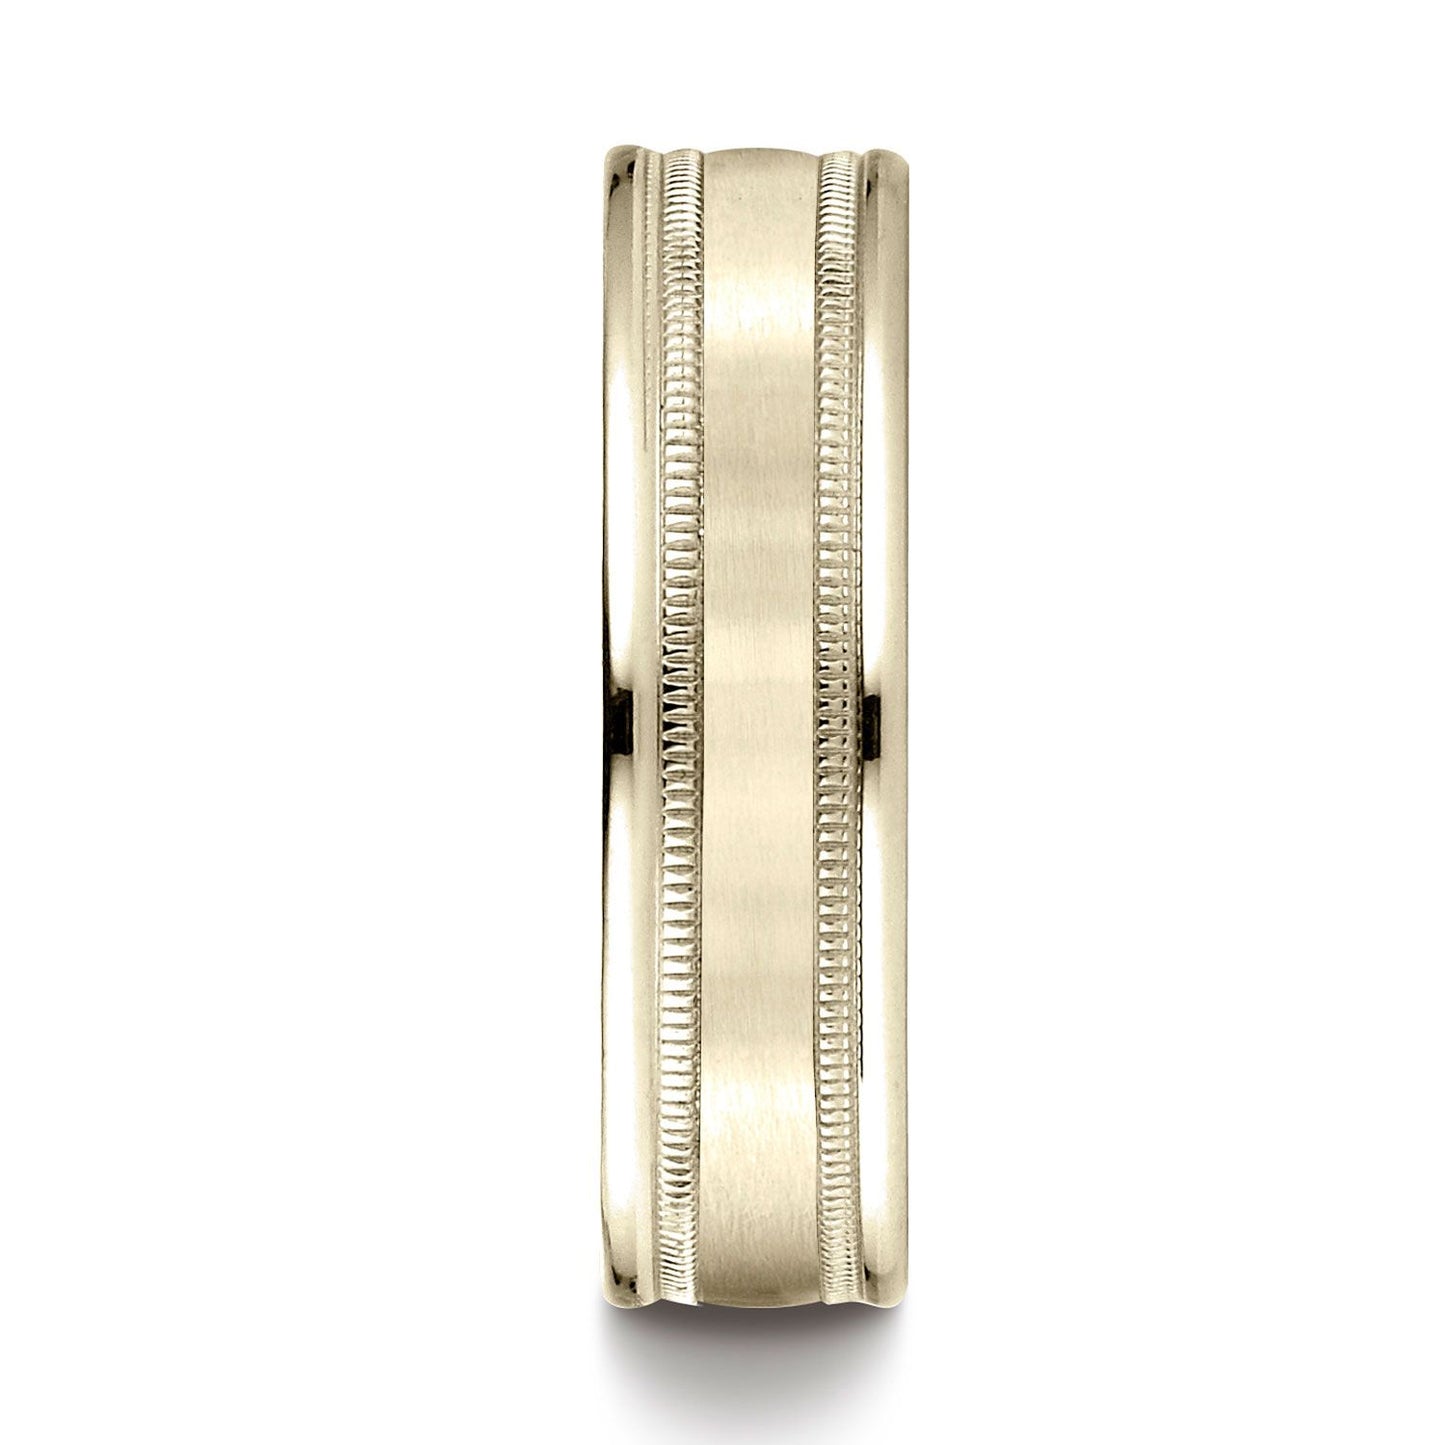 18k Yellow Gold 6mm Comfort-fit Satin Finish Center With Milgrain Round Edge Carved Design Band